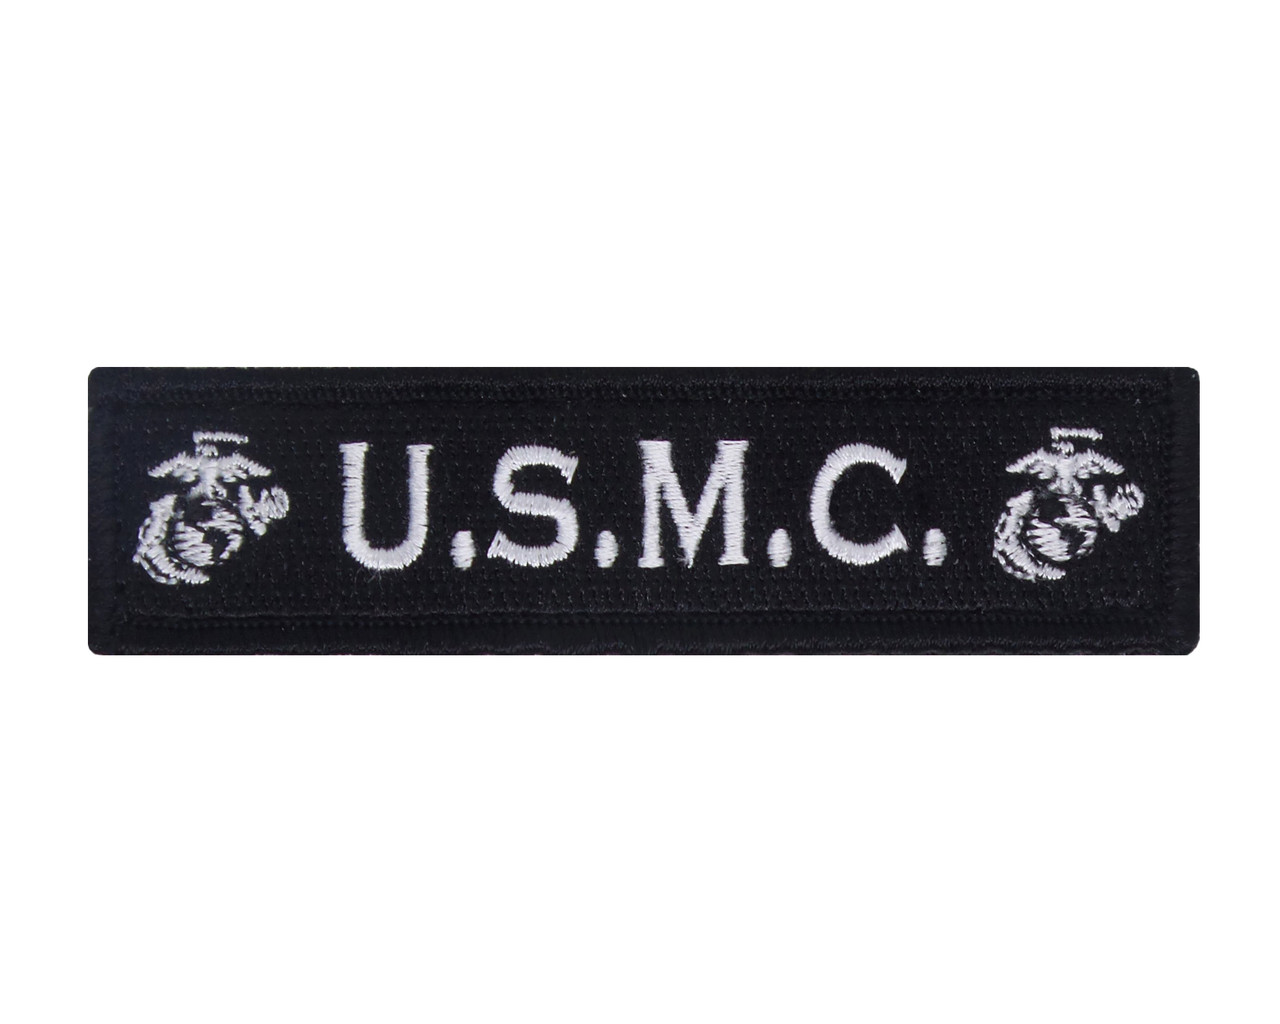 Products – Tagged Bluetails – MarinePatches.com - Custom Patches